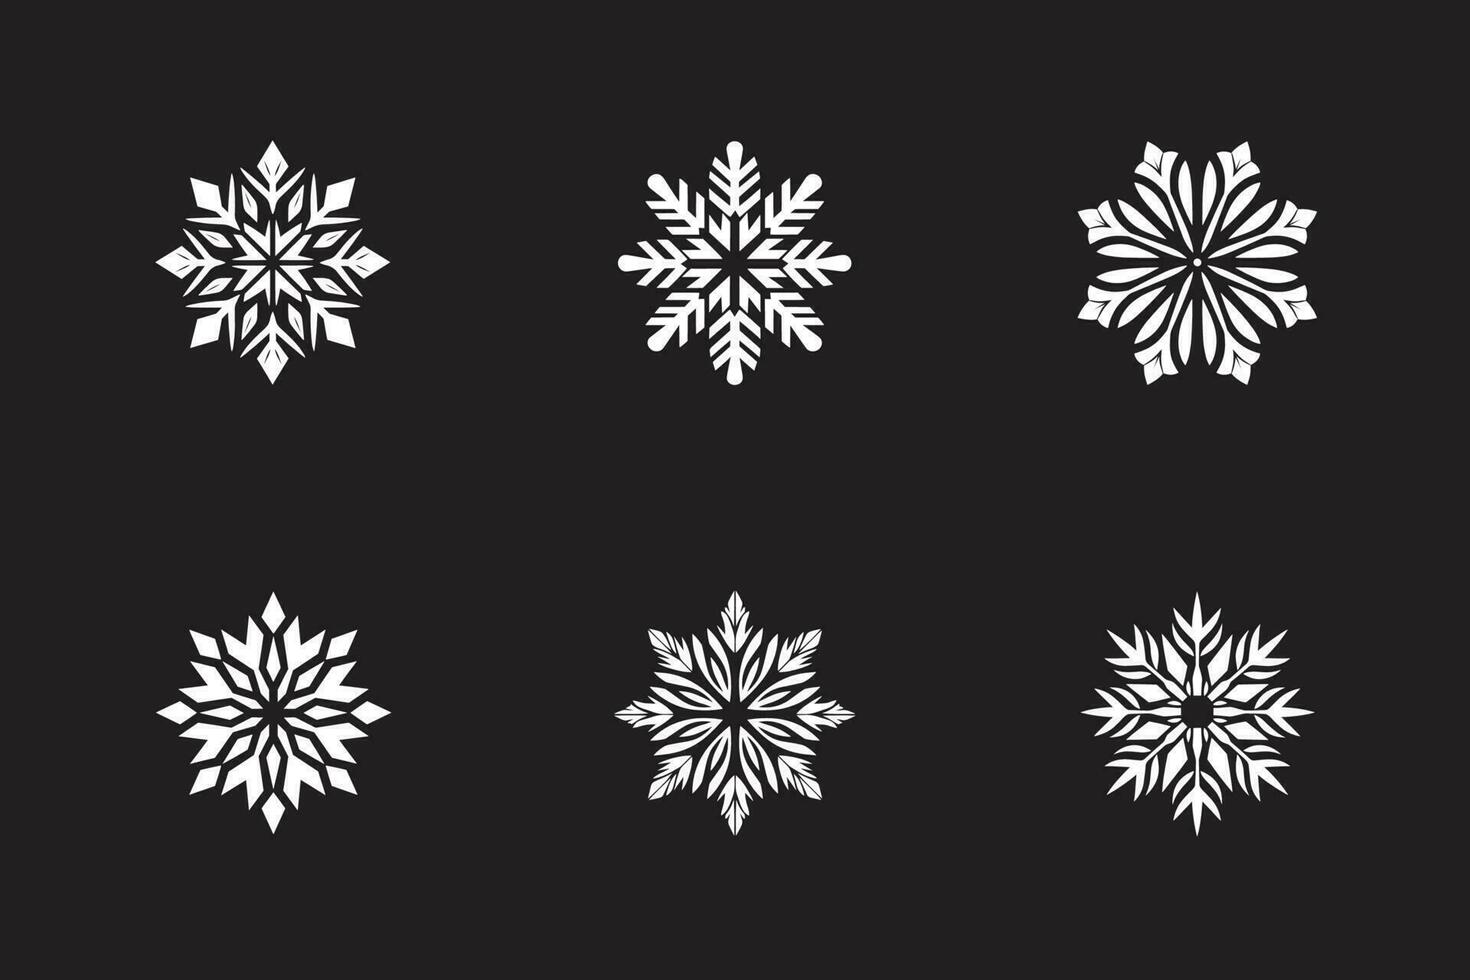 Snow Flakes For Christmas vector